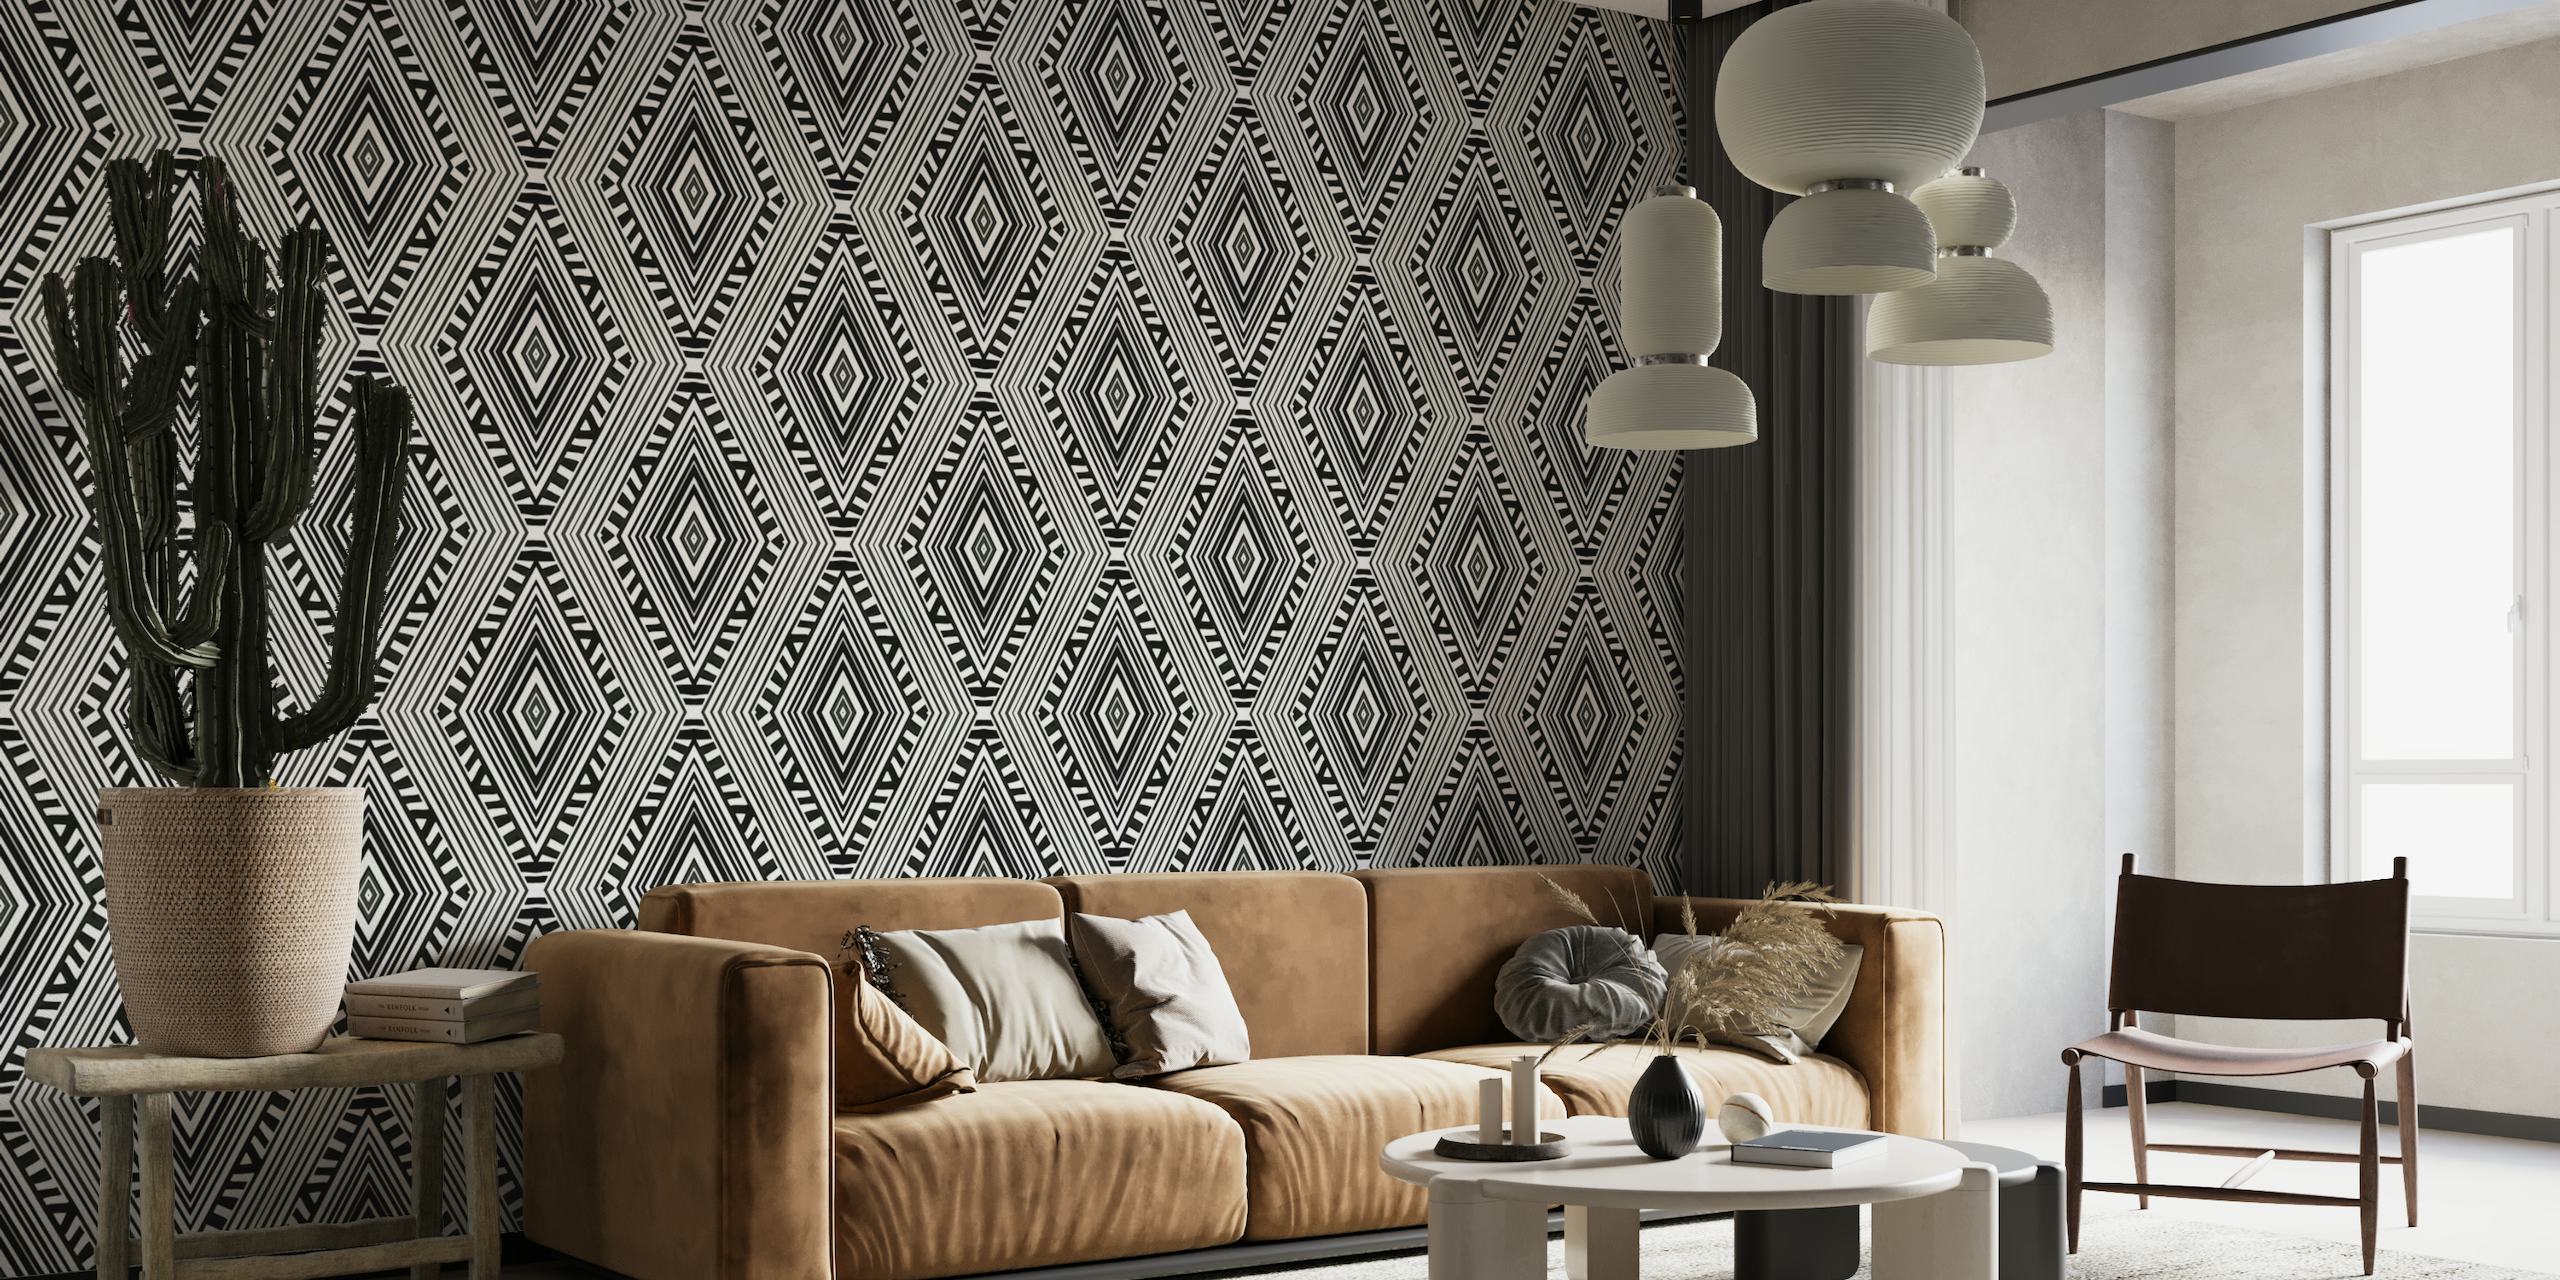 Black and white geometric African inspired tribal pattern wall mural